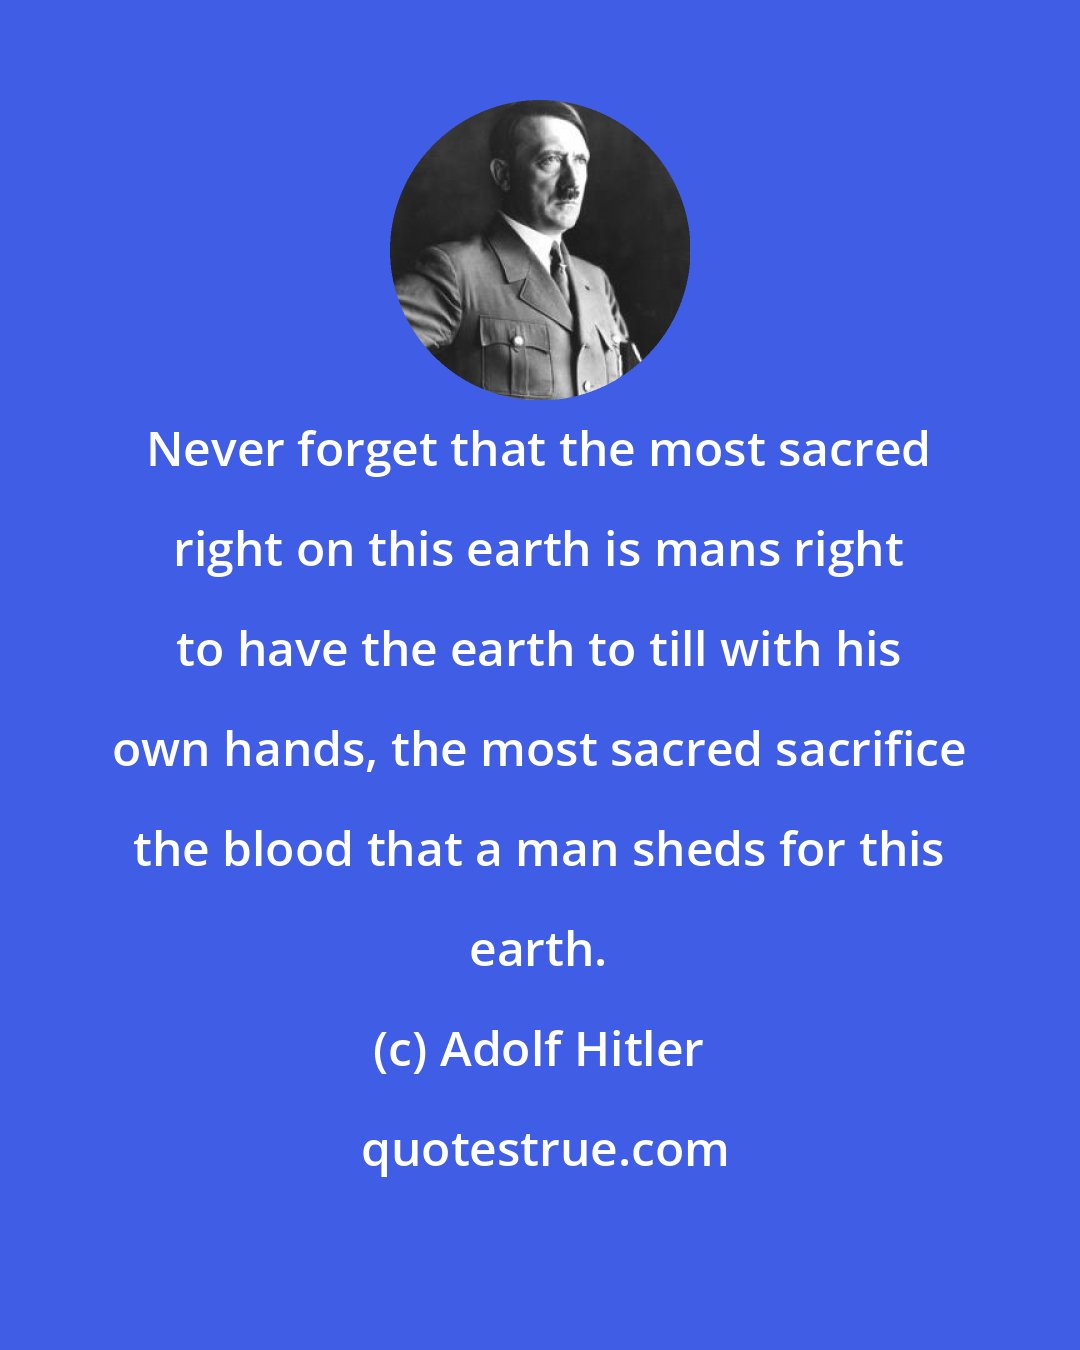 Adolf Hitler: Never forget that the most sacred right on this earth is mans right to have the earth to till with his own hands, the most sacred sacrifice the blood that a man sheds for this earth.